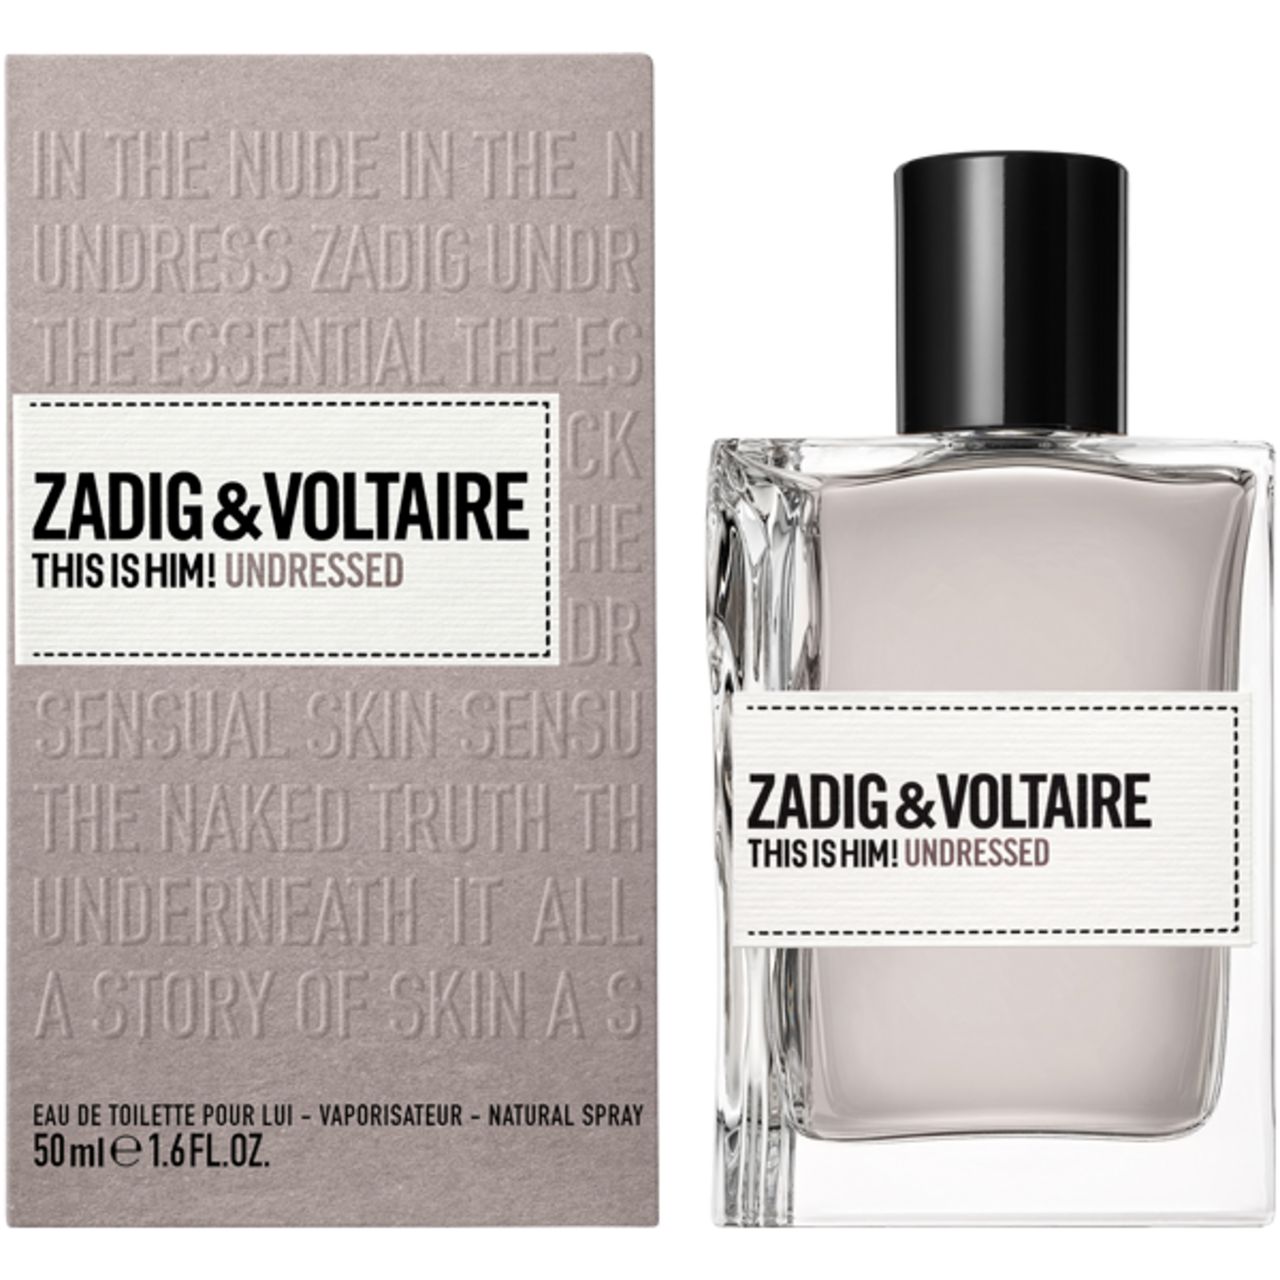 Zadig & Voltaire, This is Him! Undressed  E.d.T. Nat. Spray